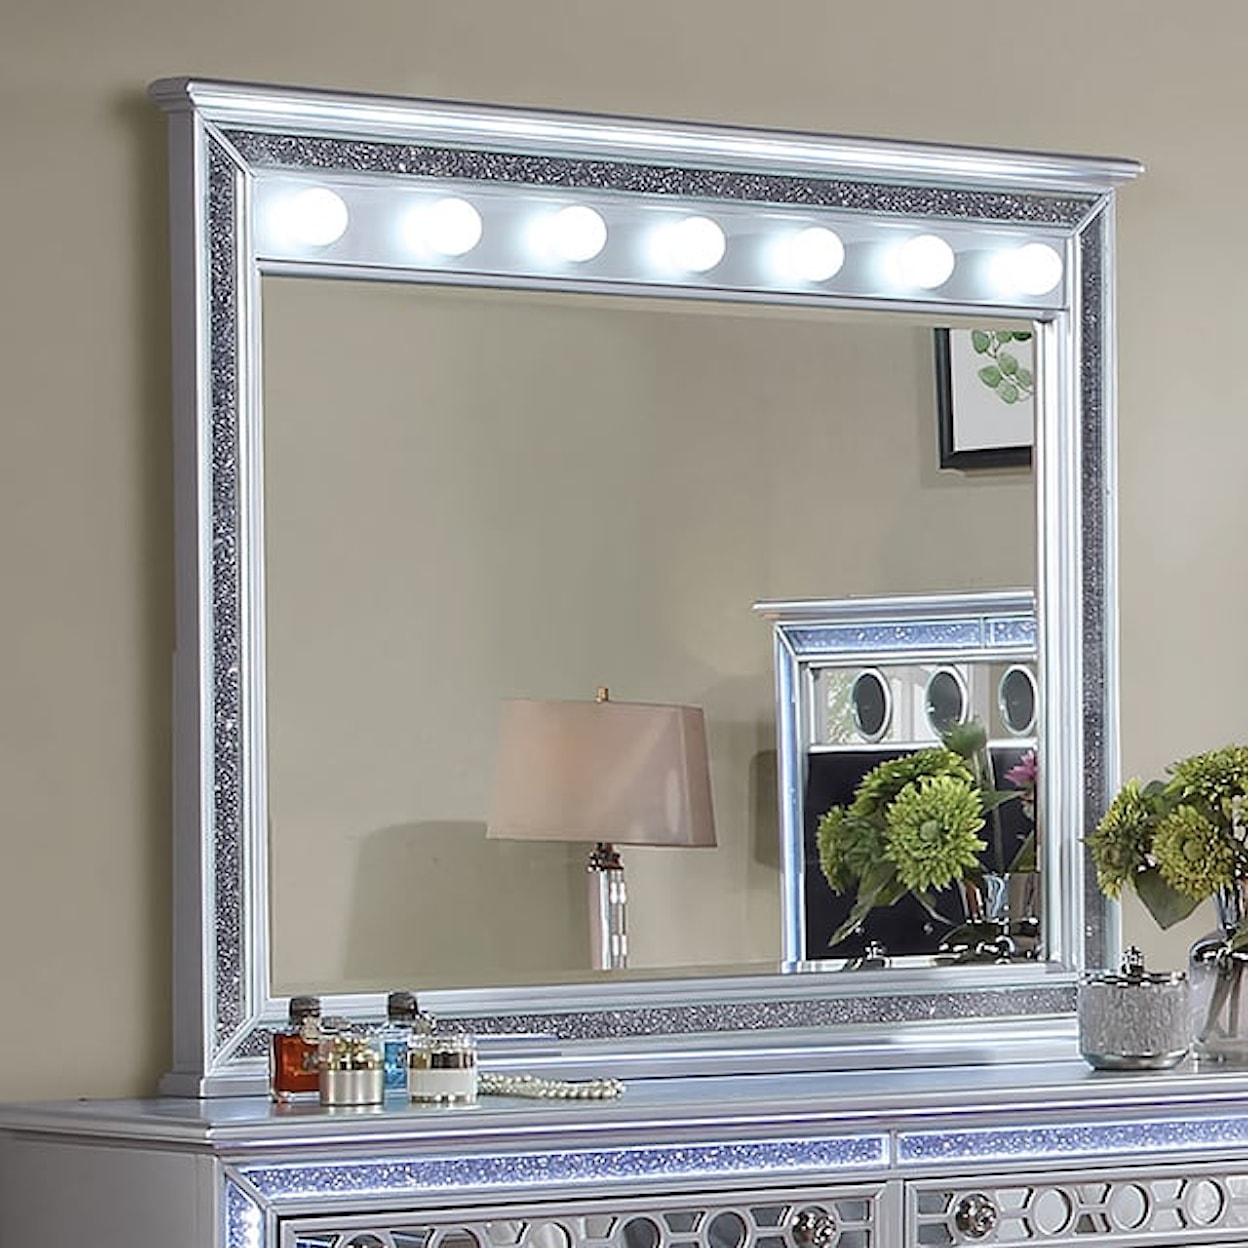 Furniture of America Mairead Dresser Mirror with Lighting